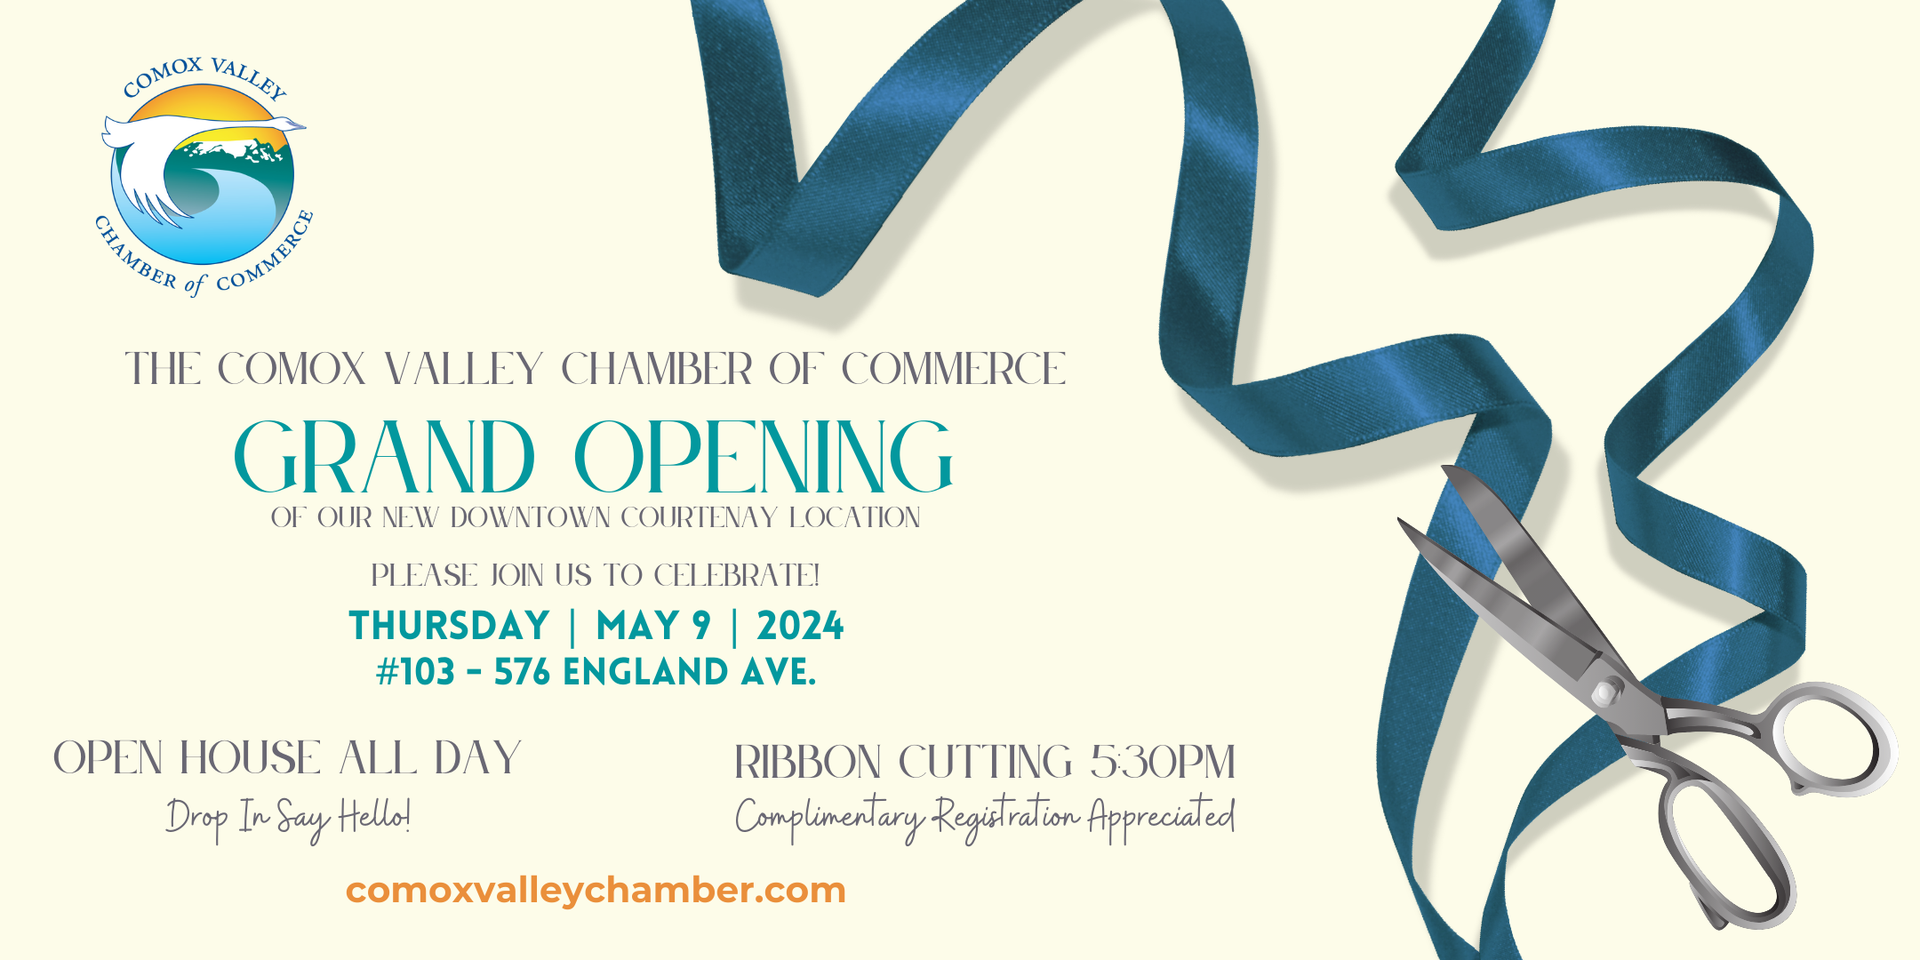 thumbnails Comox Valley Chamber Grand Opening & Ribbon Cutting